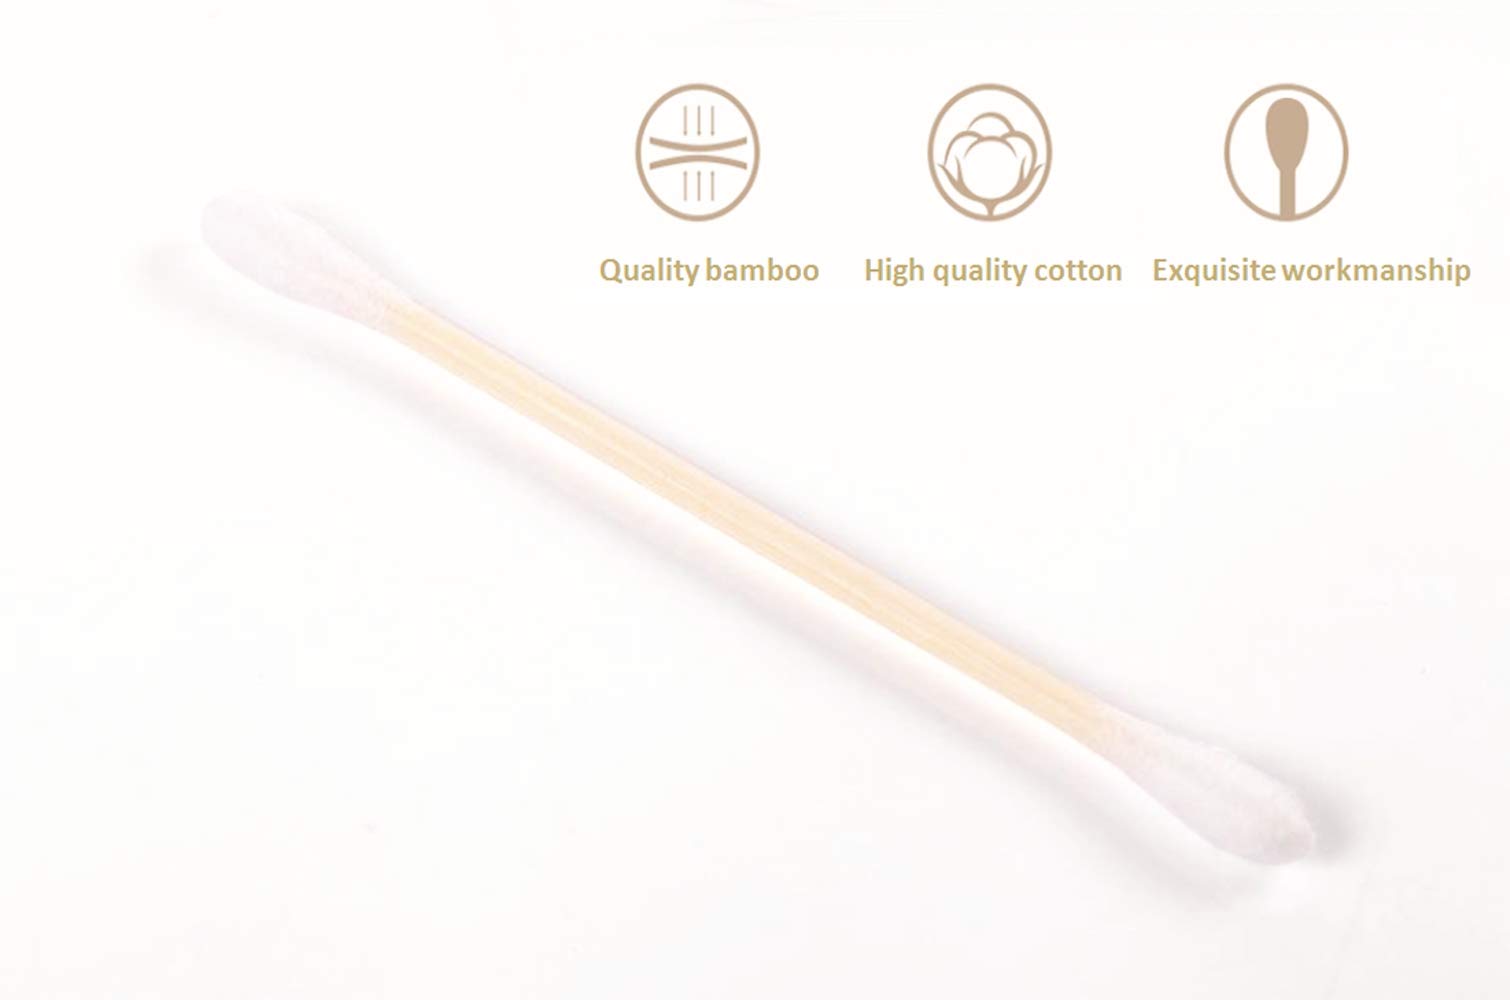 900pcs Bamboo Cotton Swabs, Biodegradable Wooden Cotton Buds